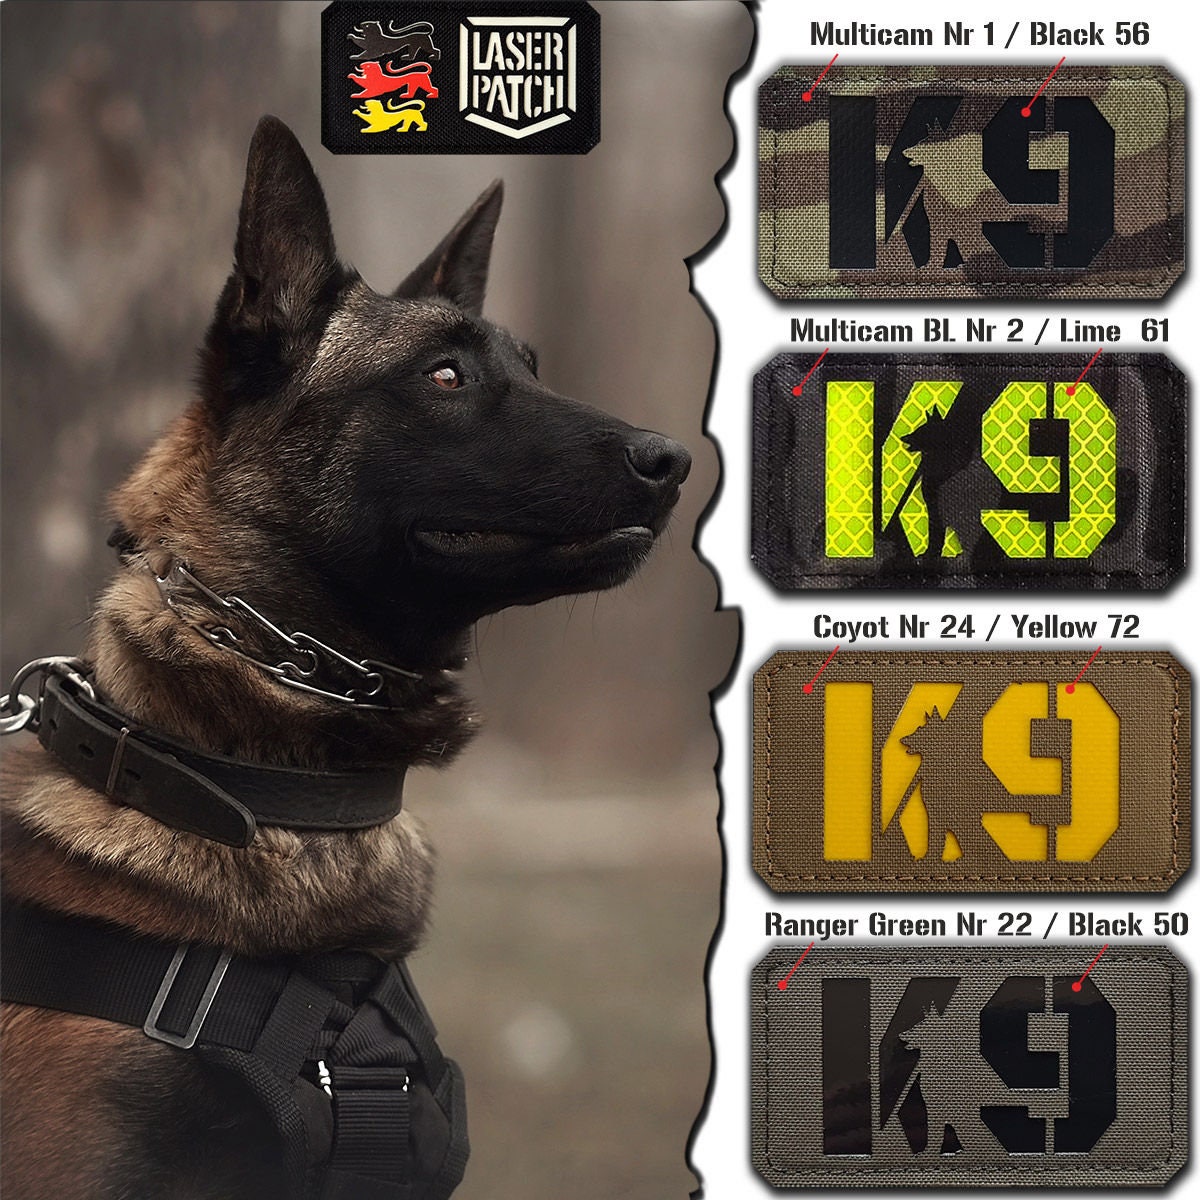 Embroidered Law Enforcement ID Panels - Sheriff K-9 - Gray